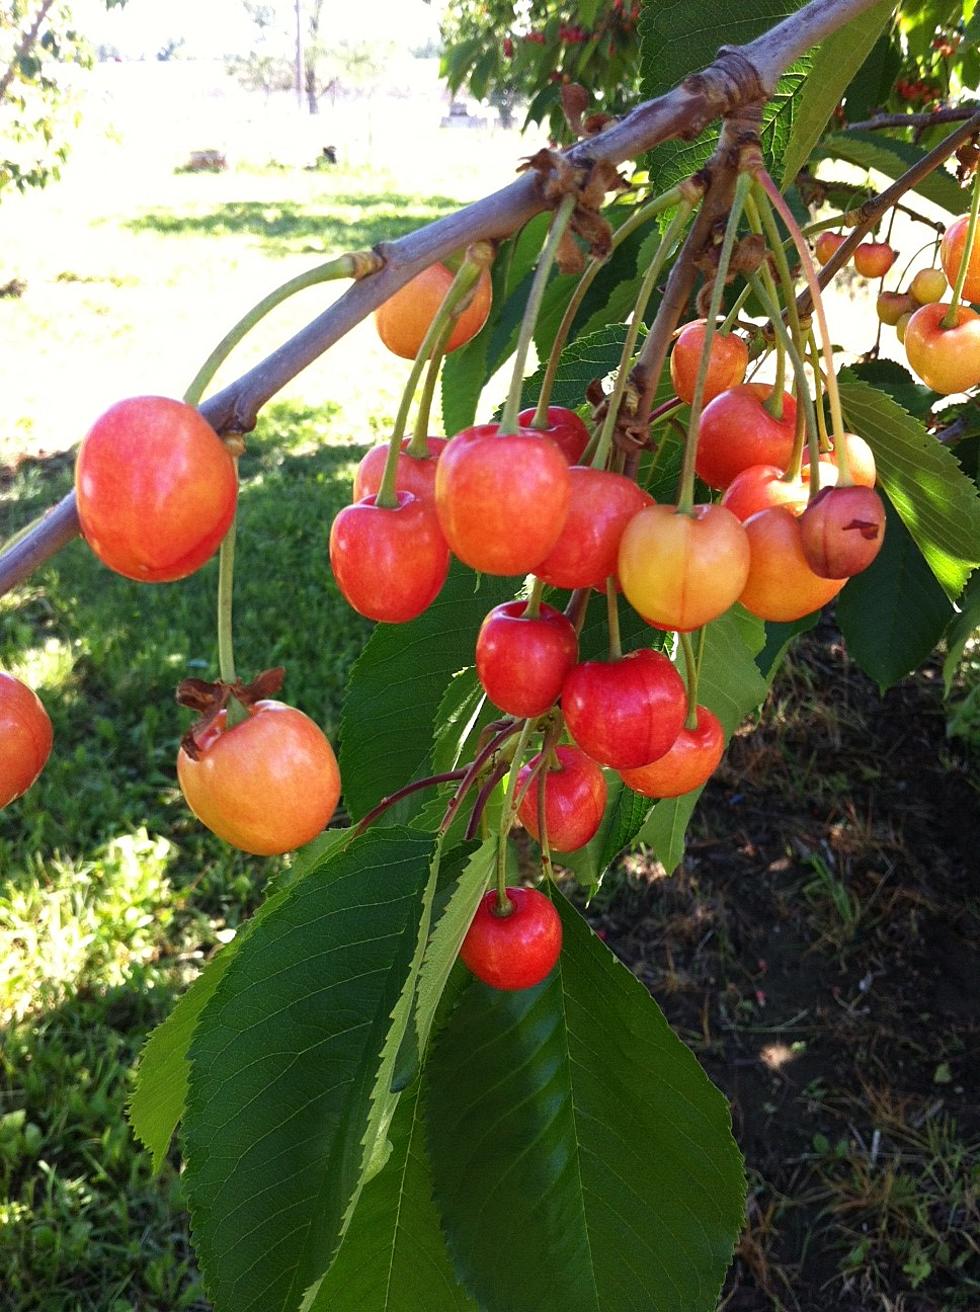 Who’s Ready for Cherries? Share Your Recipes With Us